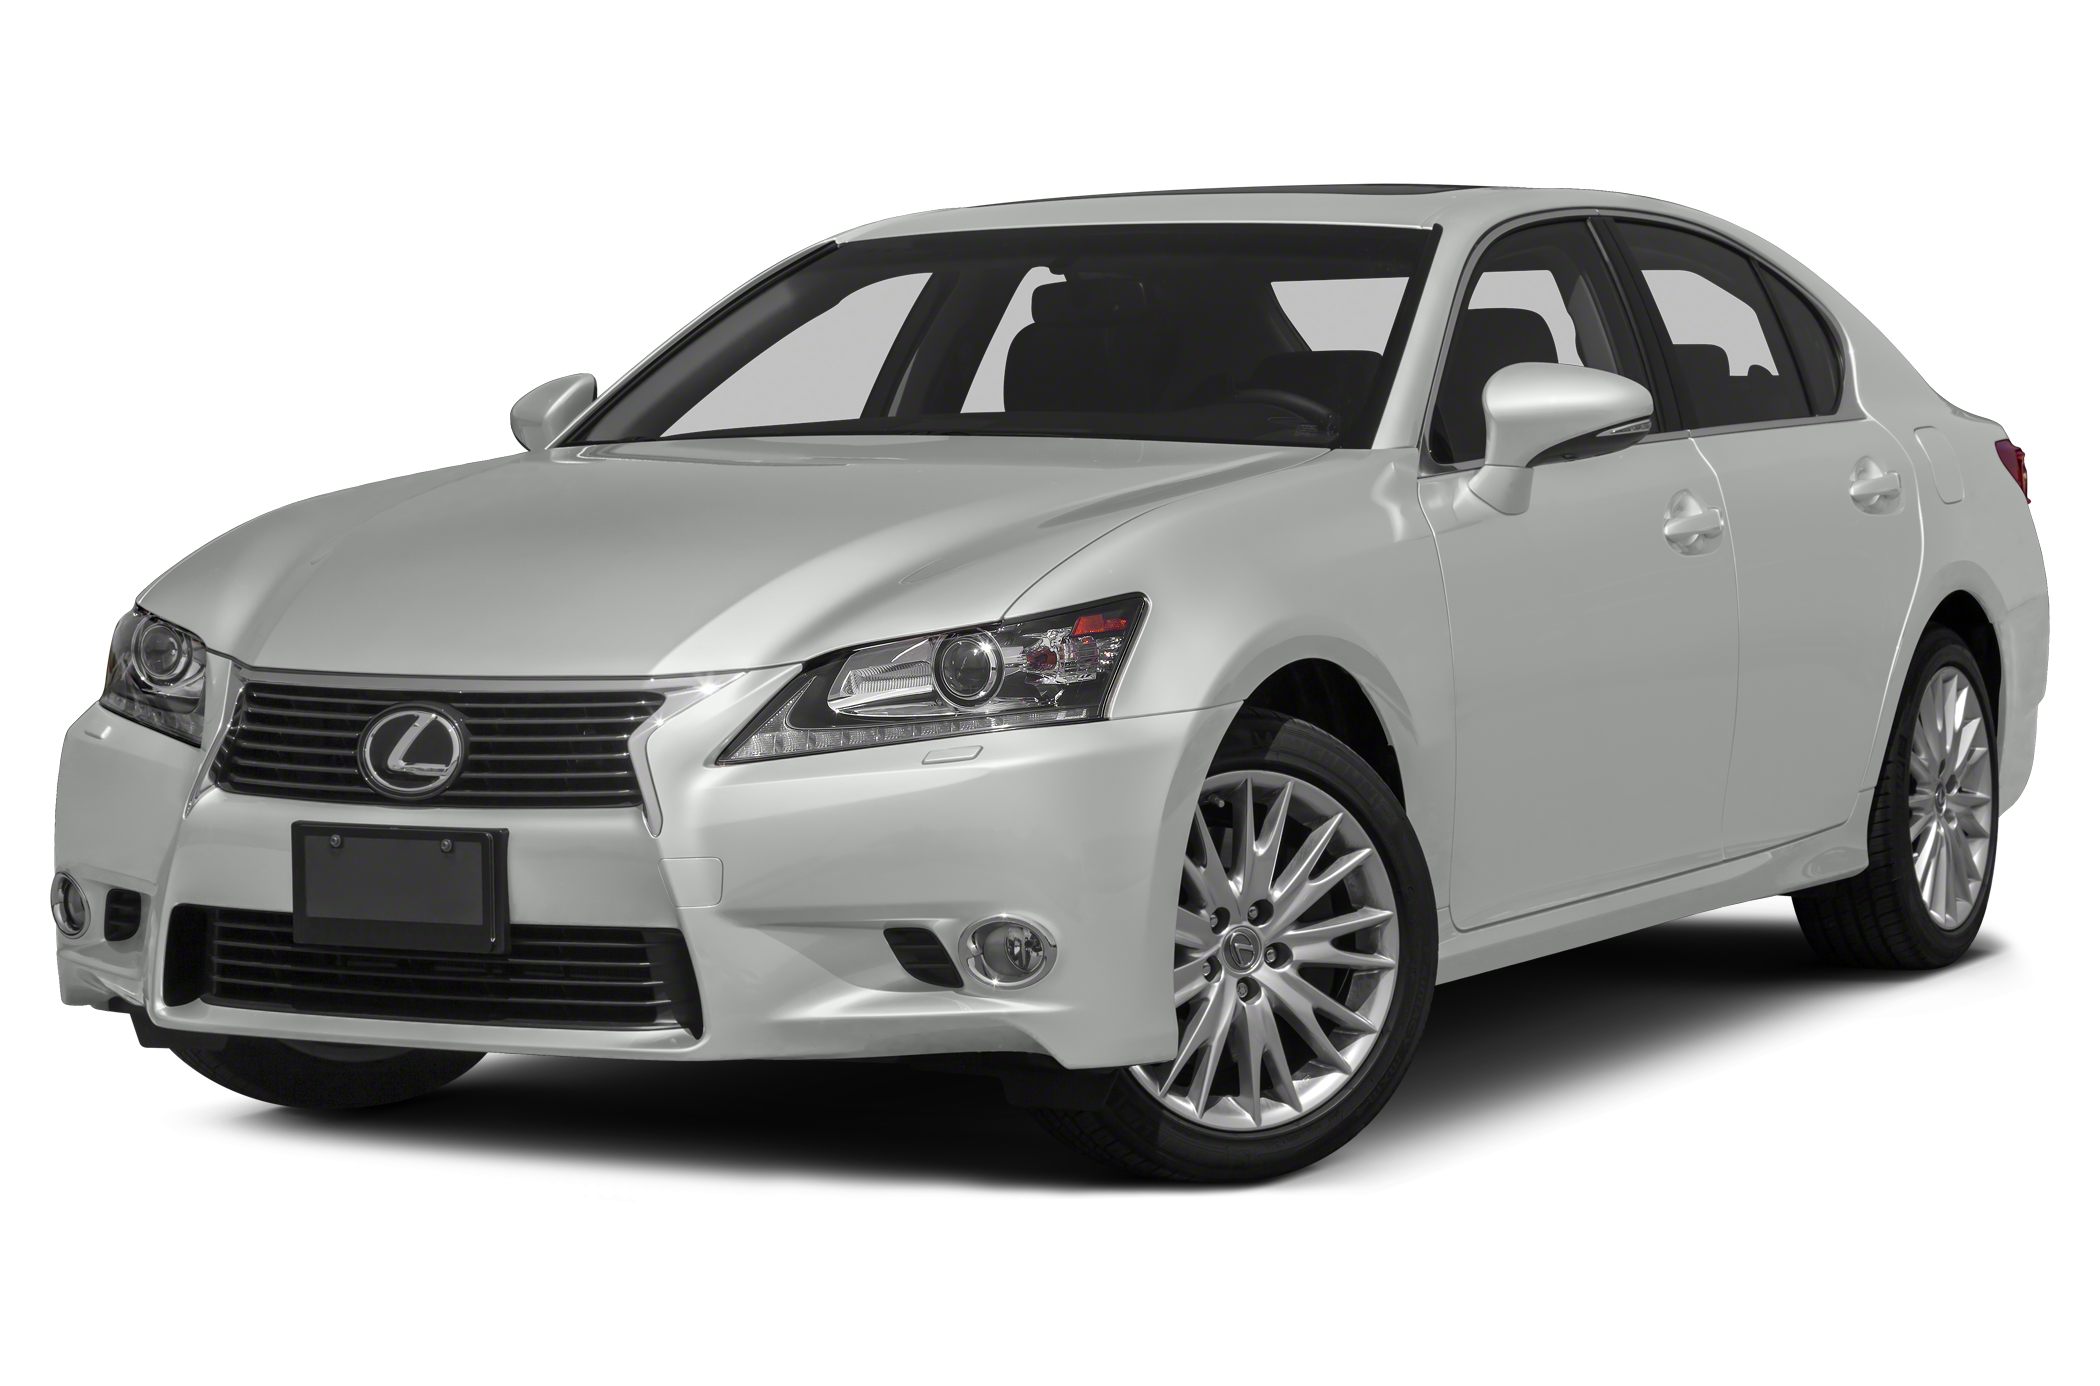 15 Lexus Gs 350 Crafted Line 4dr All Wheel Drive Sedan Specs And Prices